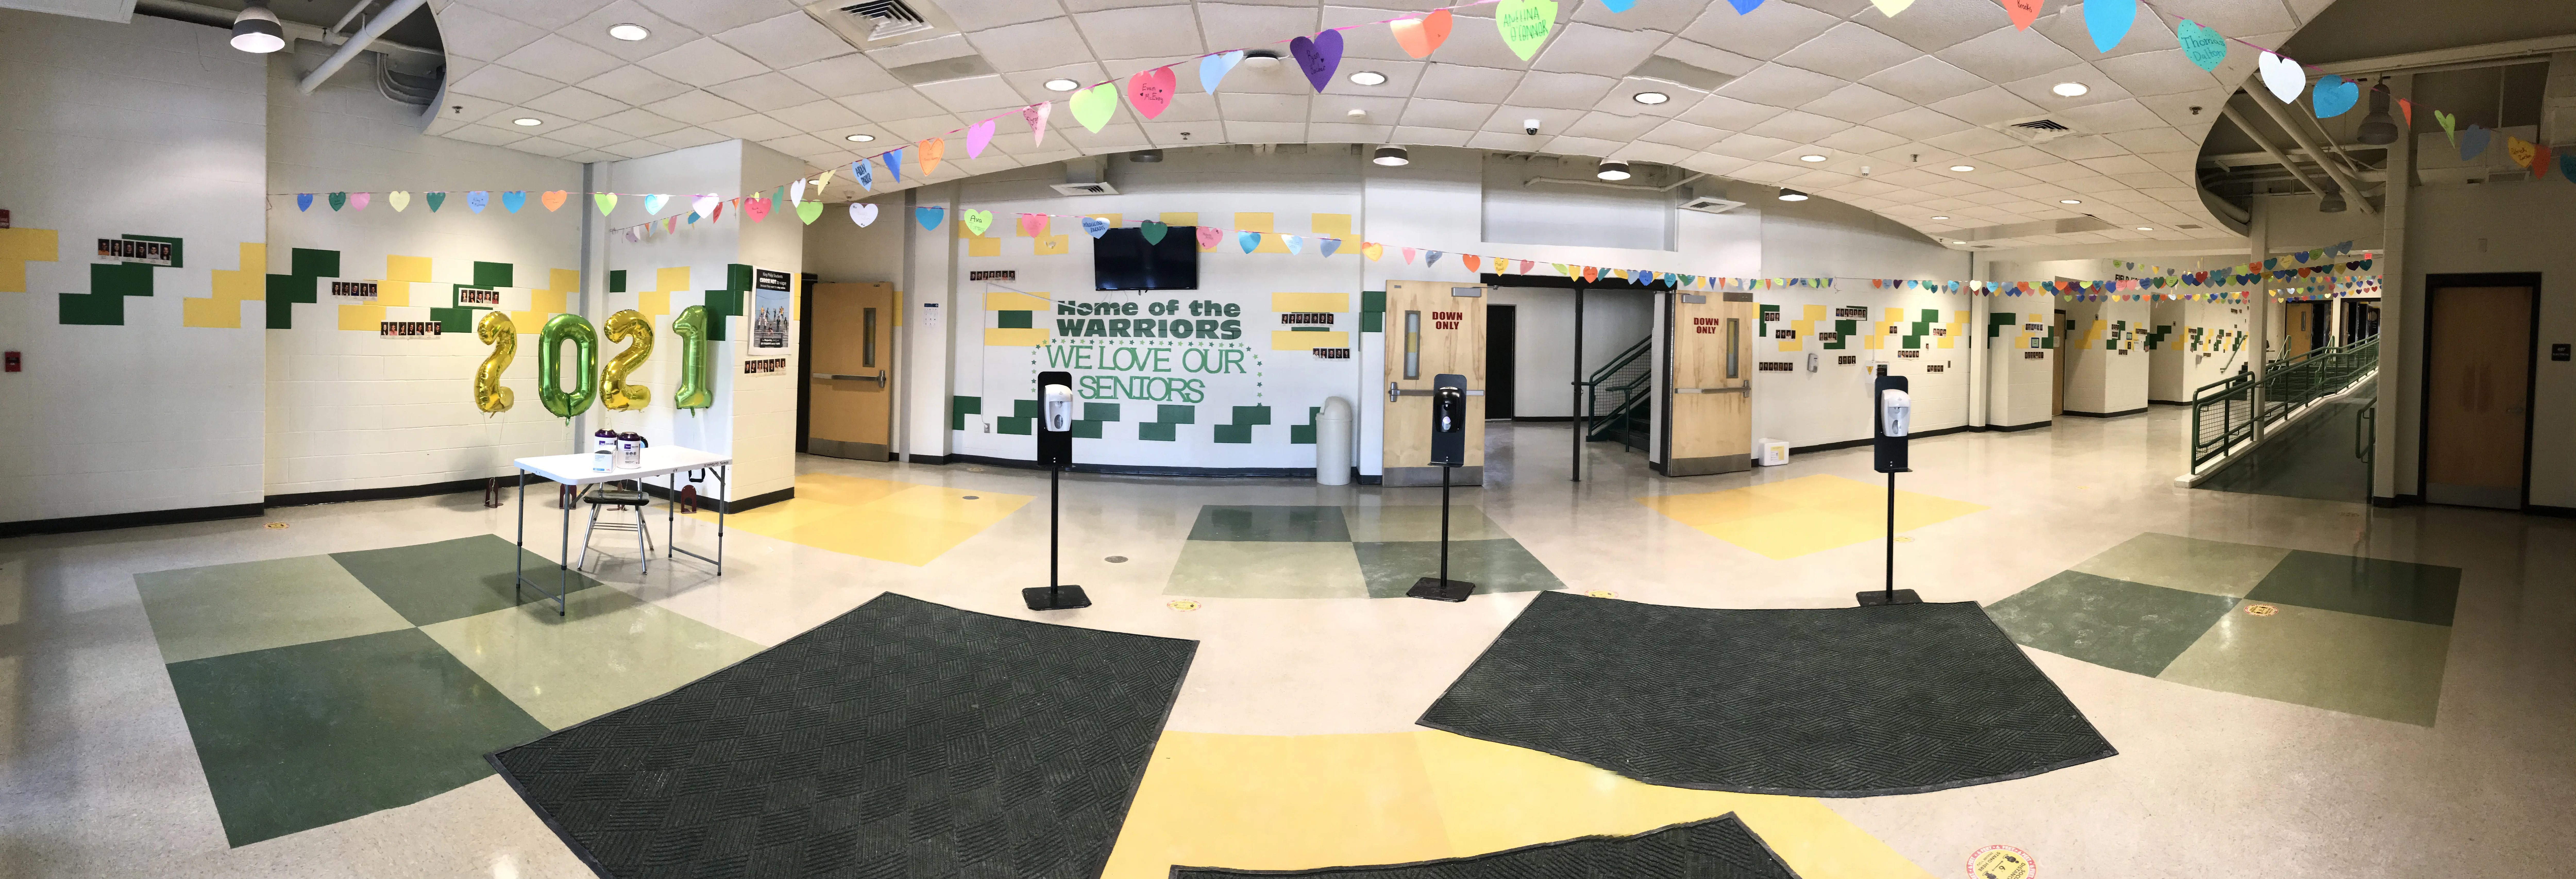 Student Council and KP Cares partnered together to decorate the school’s lobby as part of their ‘We Love Our Seniors’ project on Wednesday, Feb. 10. (Photo courtesy King Philip Regional School District)